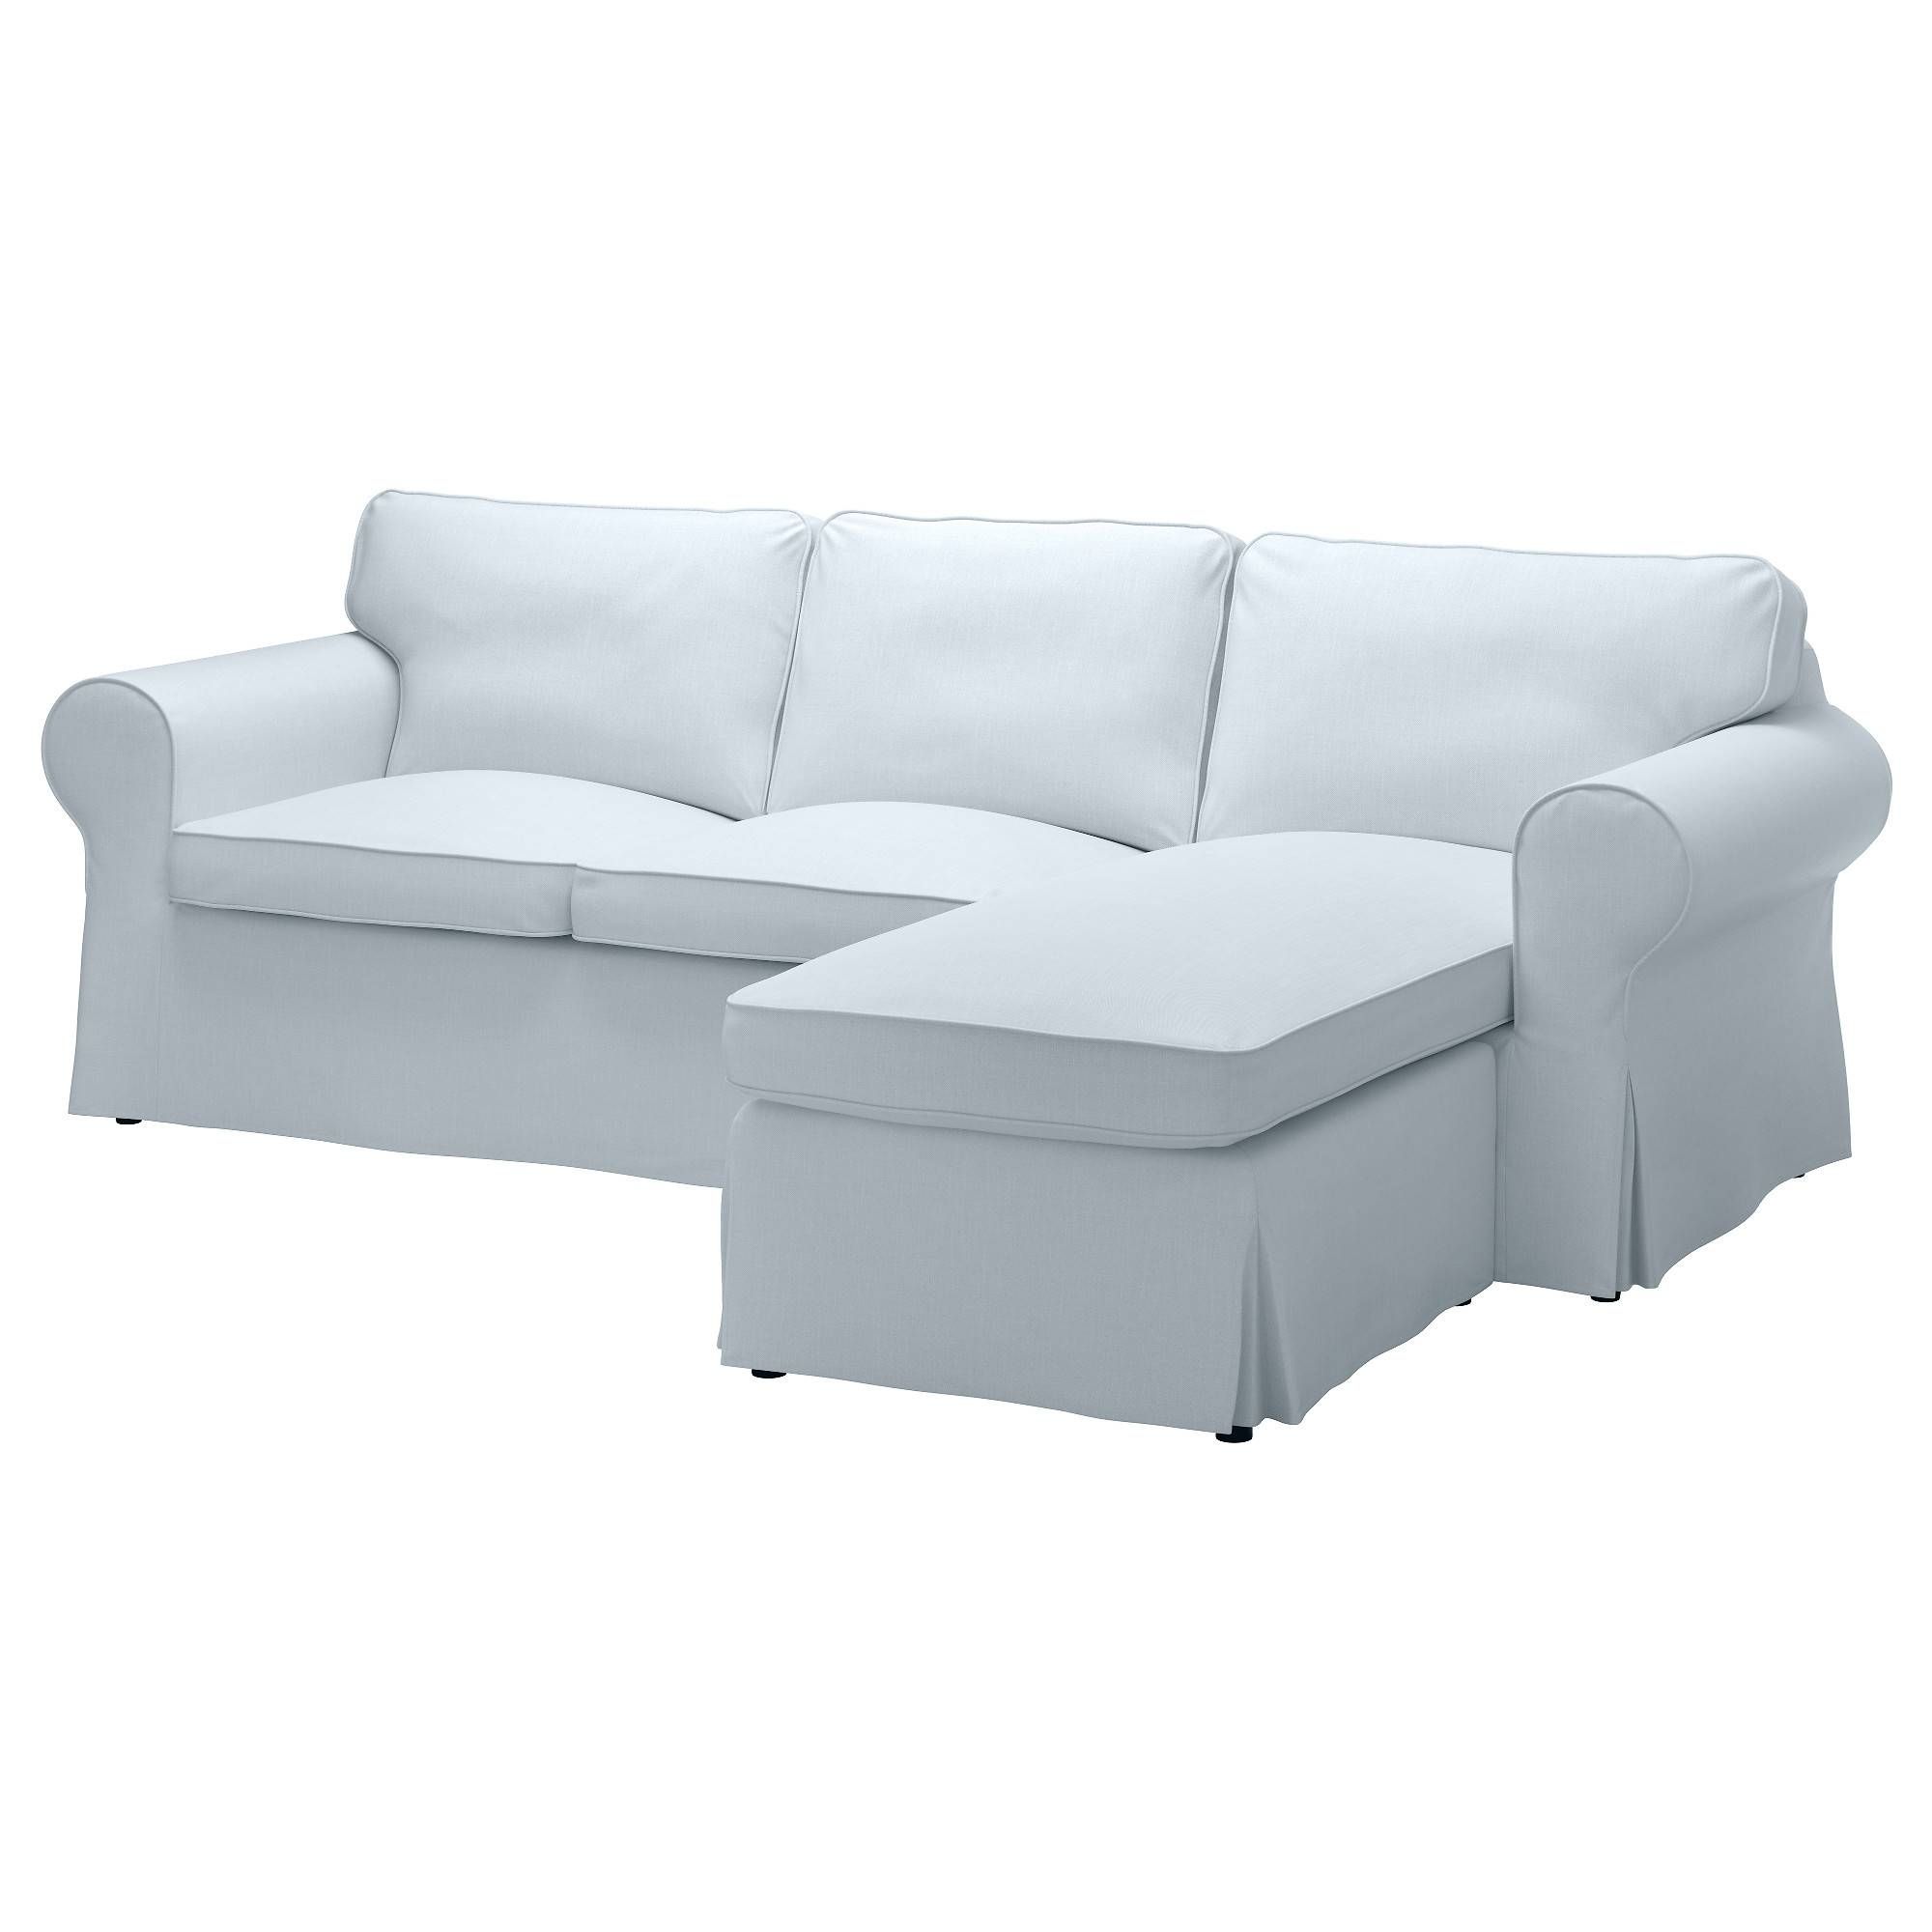 The Best Ikea Chaise Lounge Sofa